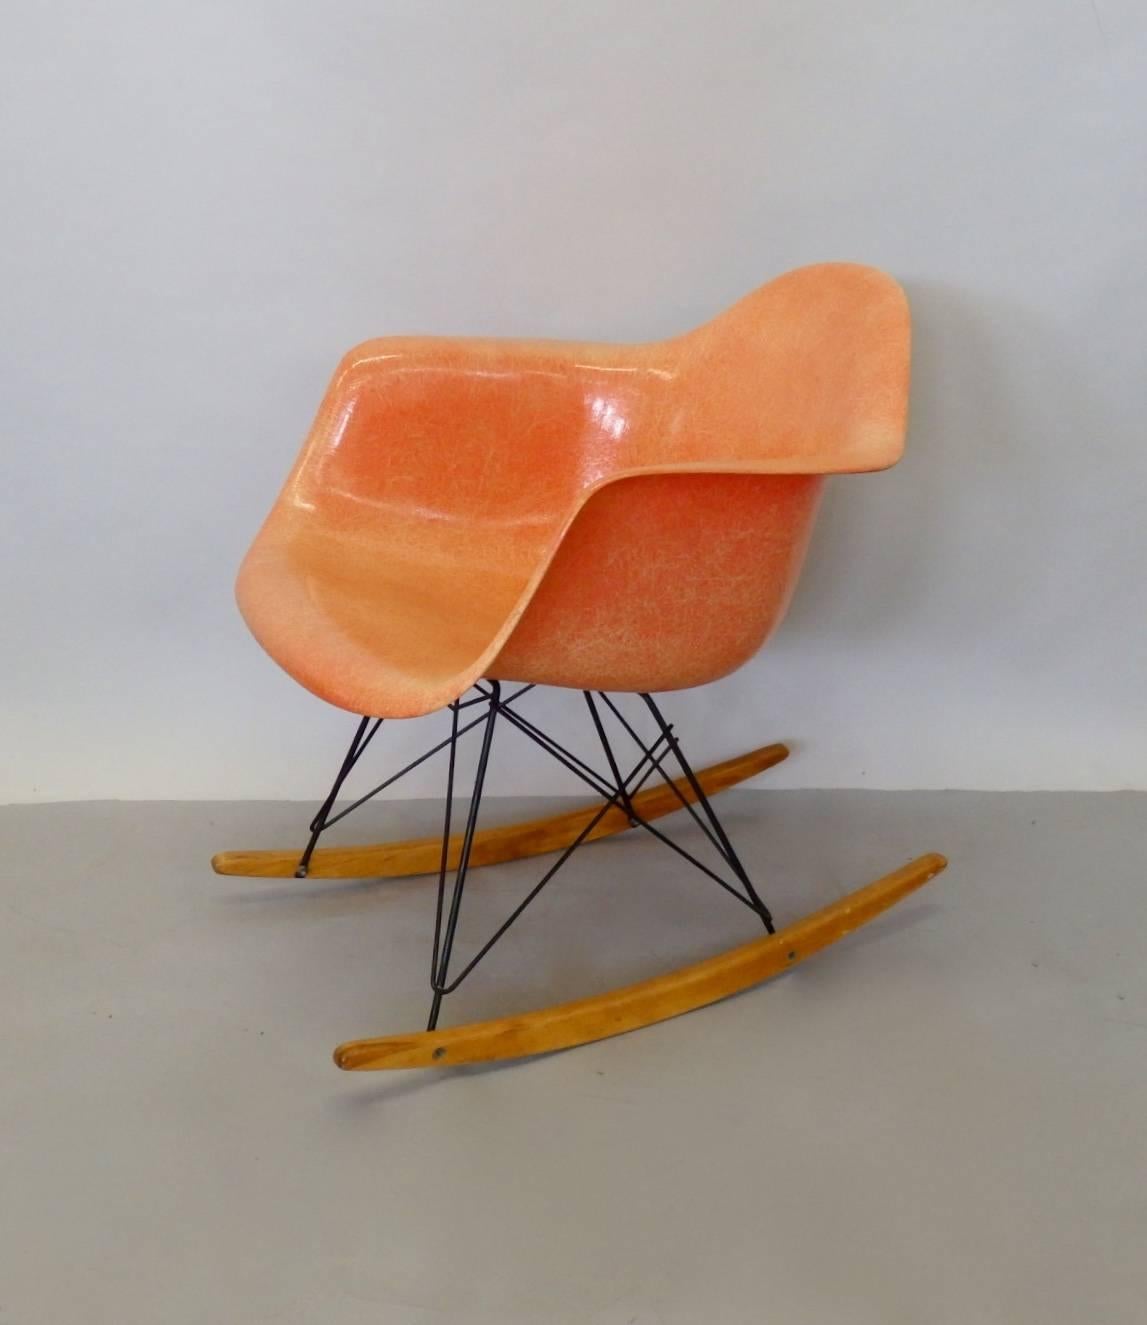 The best I have ever owned Charles and Ray Eames rope edge rocker. Excellent Eames Herman Miller Zenith Plastics label. Correct hardware no shock mount blemishes.